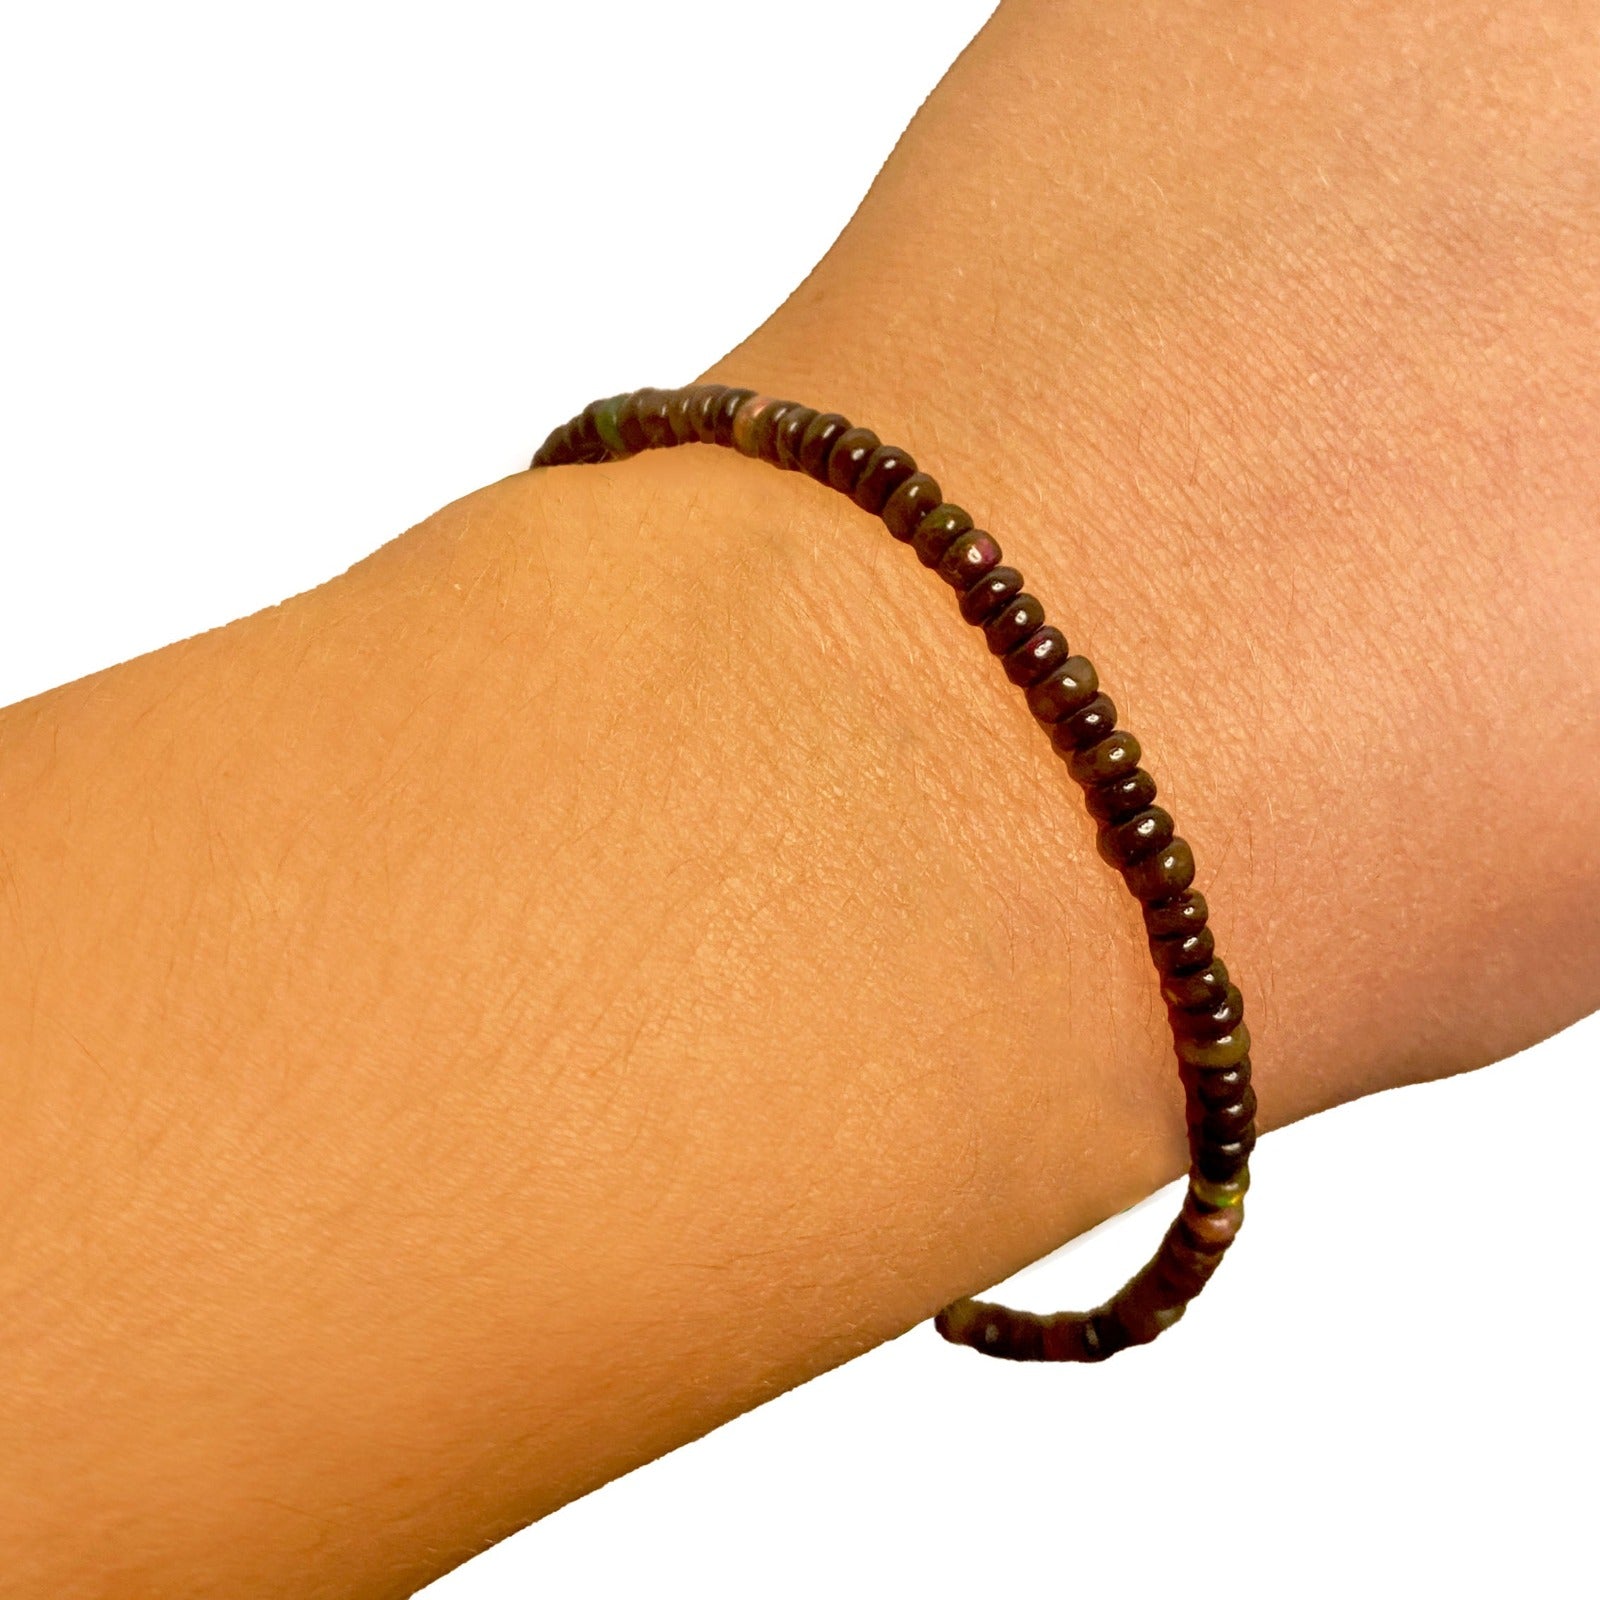 Shimmering beaded bracelet made of smooth opals in shades of brown on a gold linking lobster clasp.